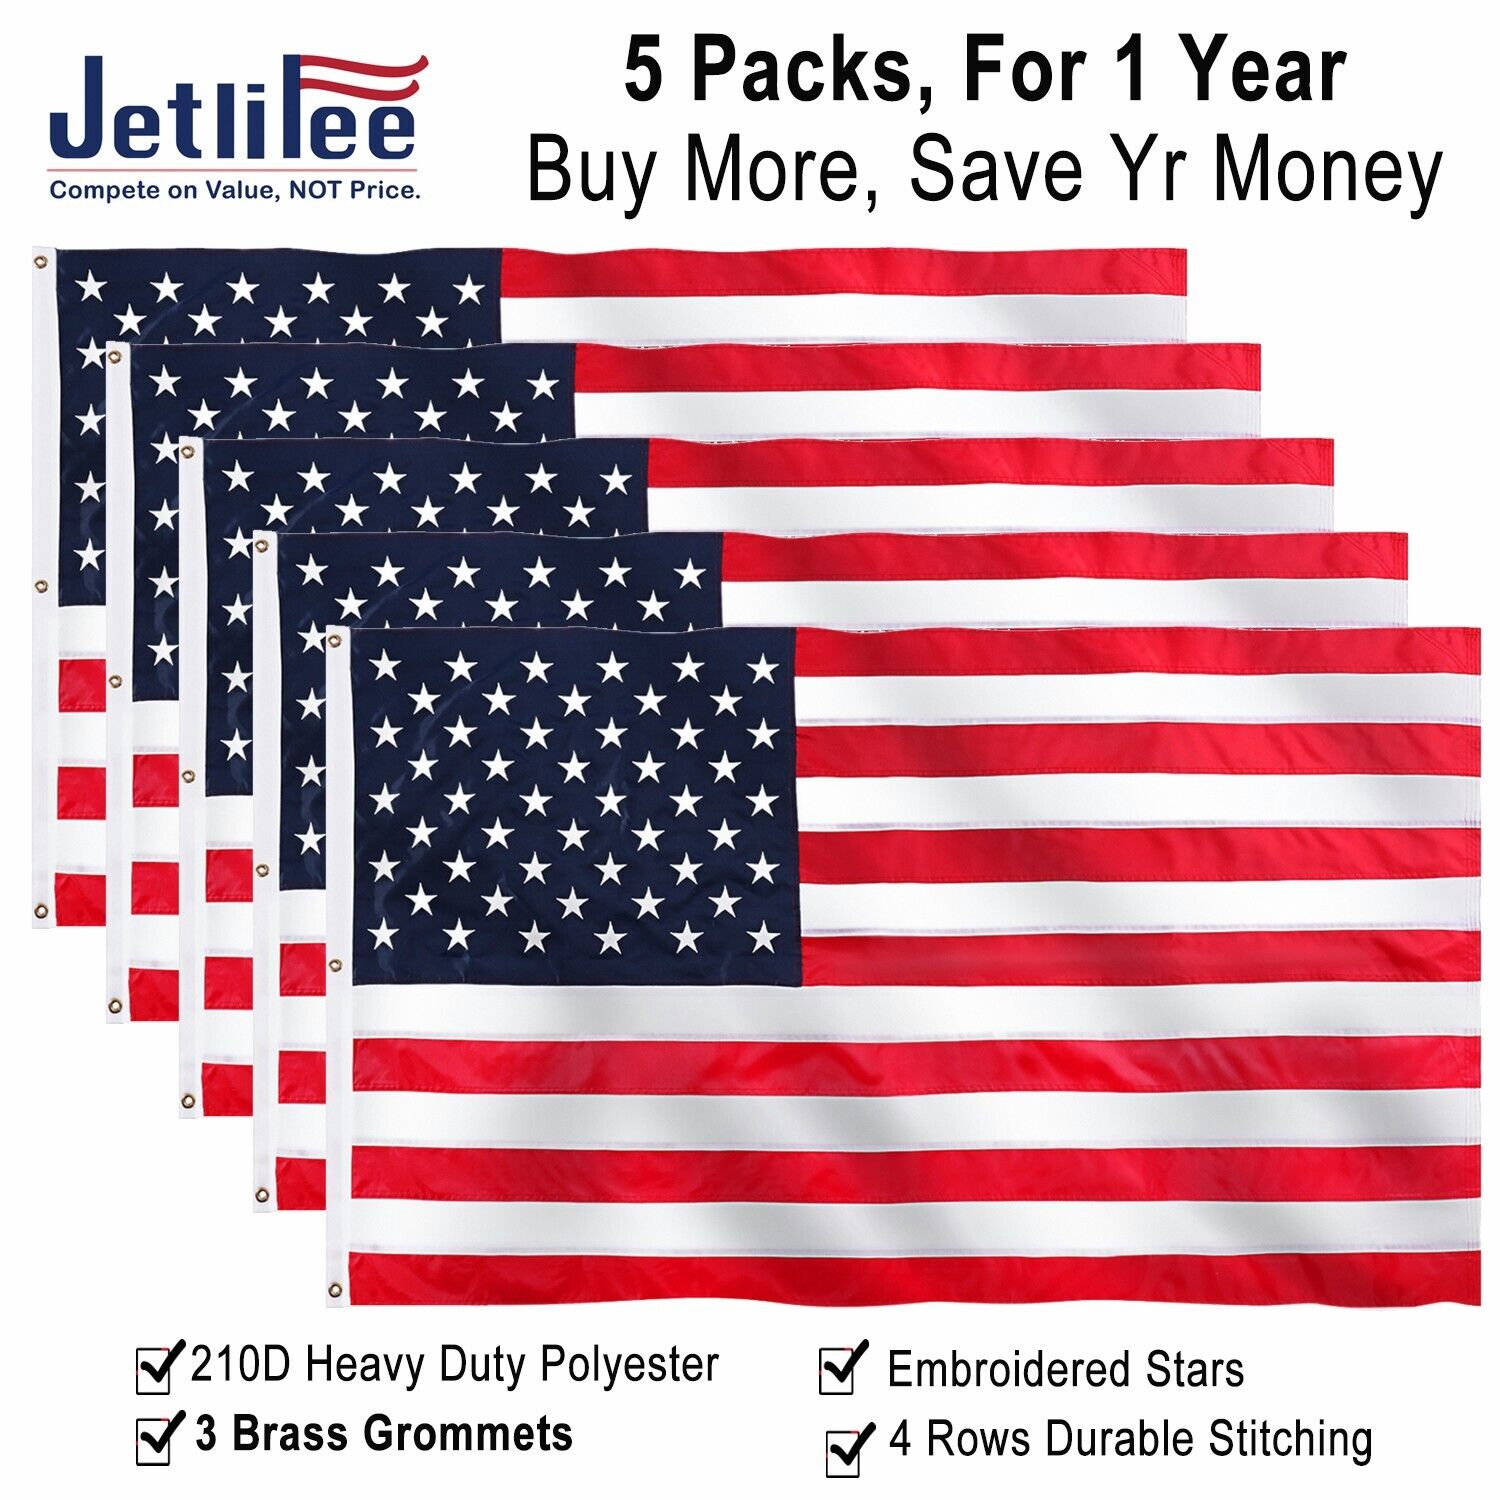 Jetlifee 5 Packs 5x8 FT American US Flag Banner Heavy Duty 210D Embroidered